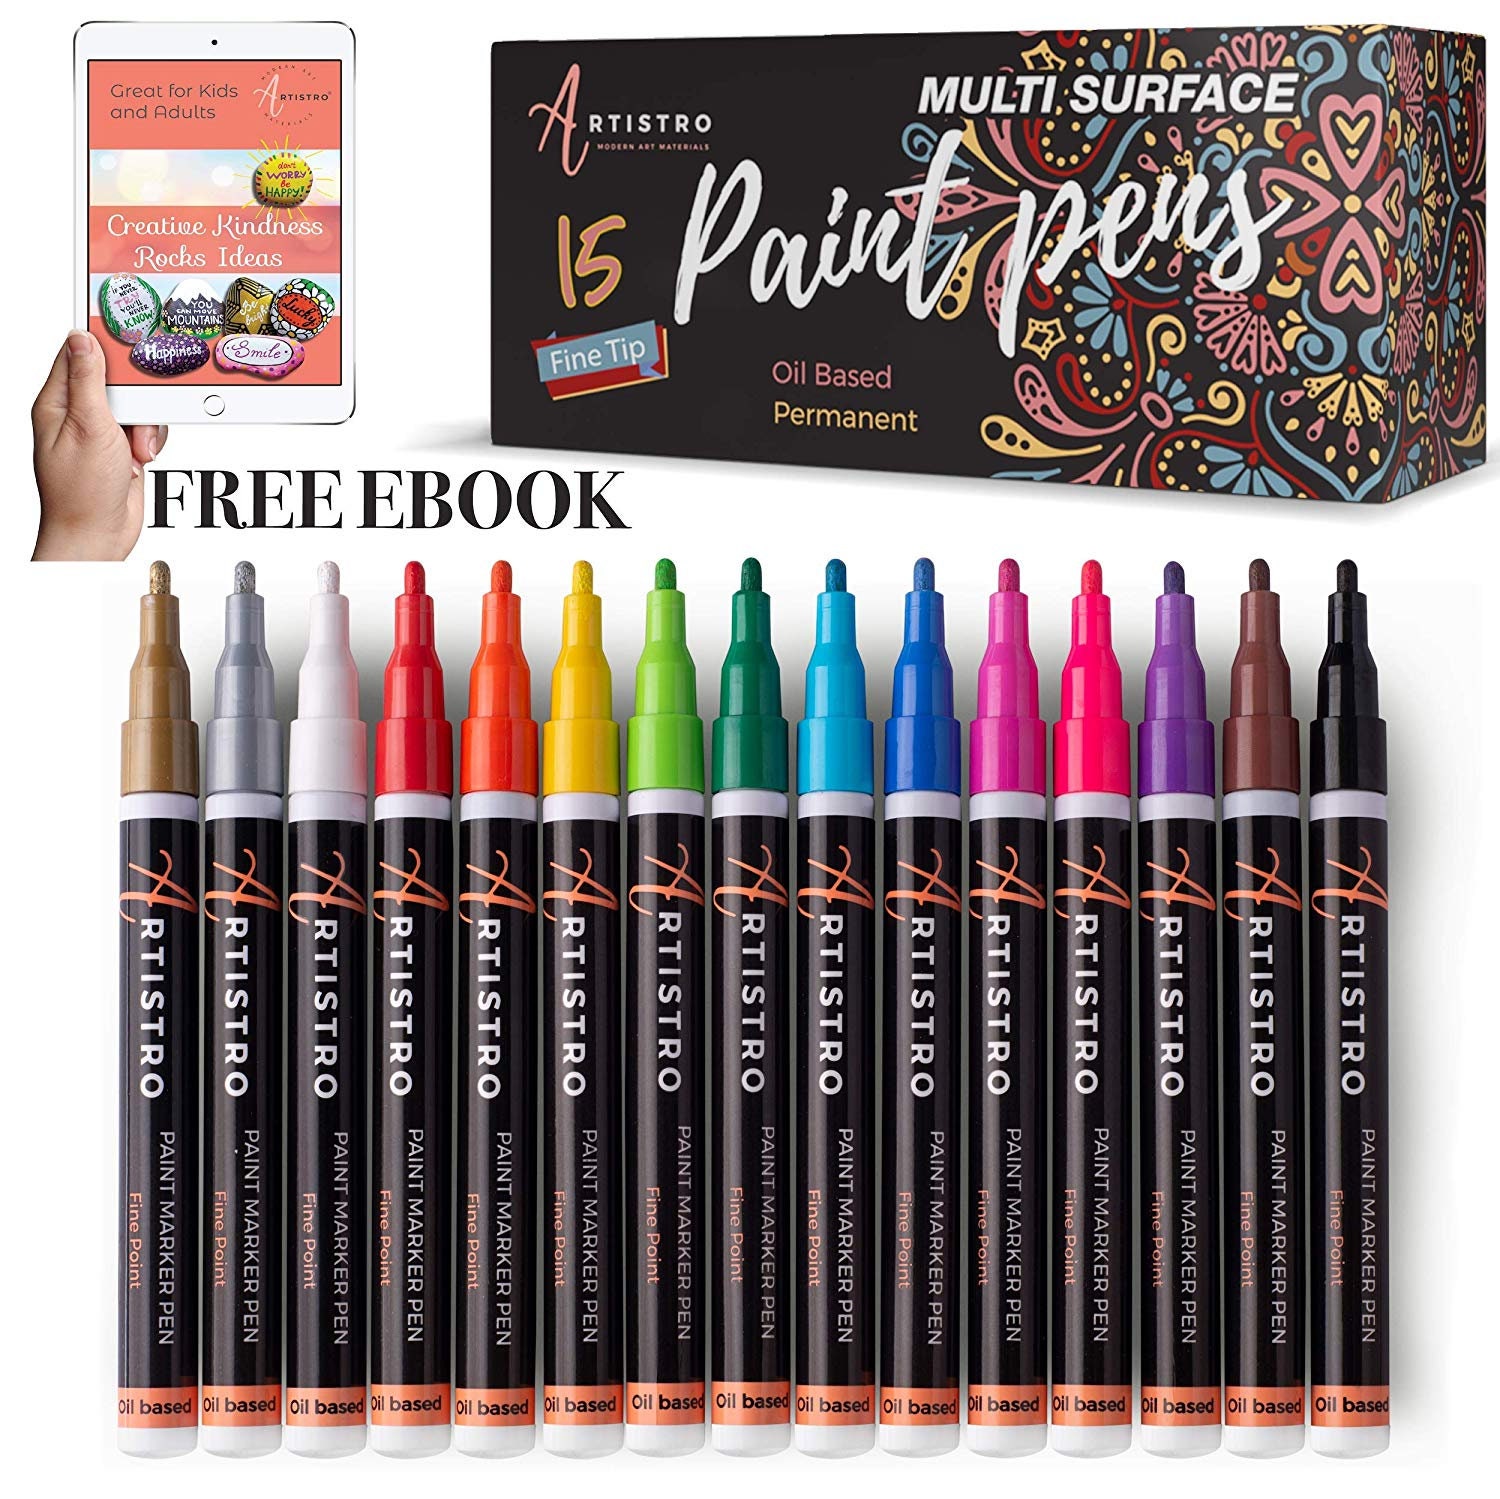 Unleash Your Creativity with Posca Pen Markers: A Comprehensive